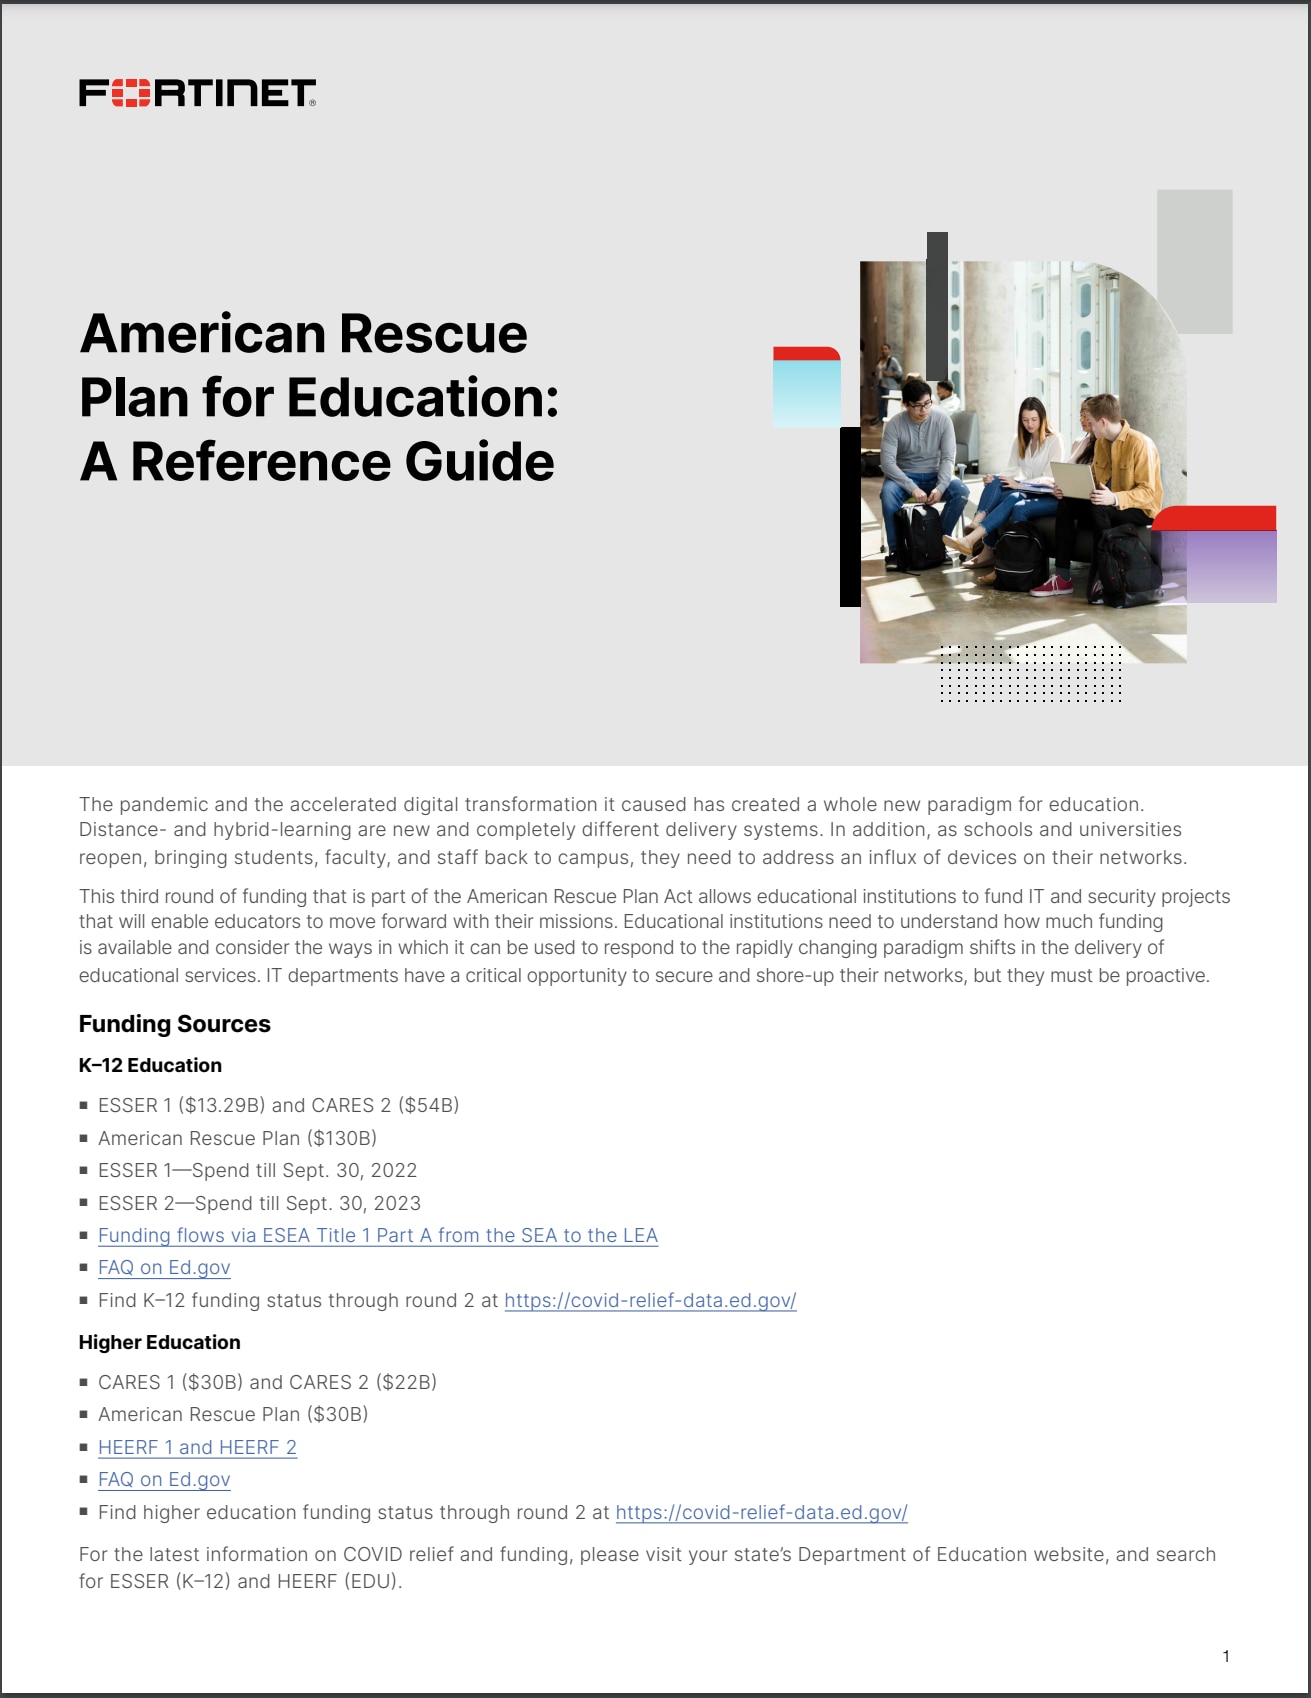 American Rescue Plan for Education: A Reference Guide (sold in package, 10pc per package)